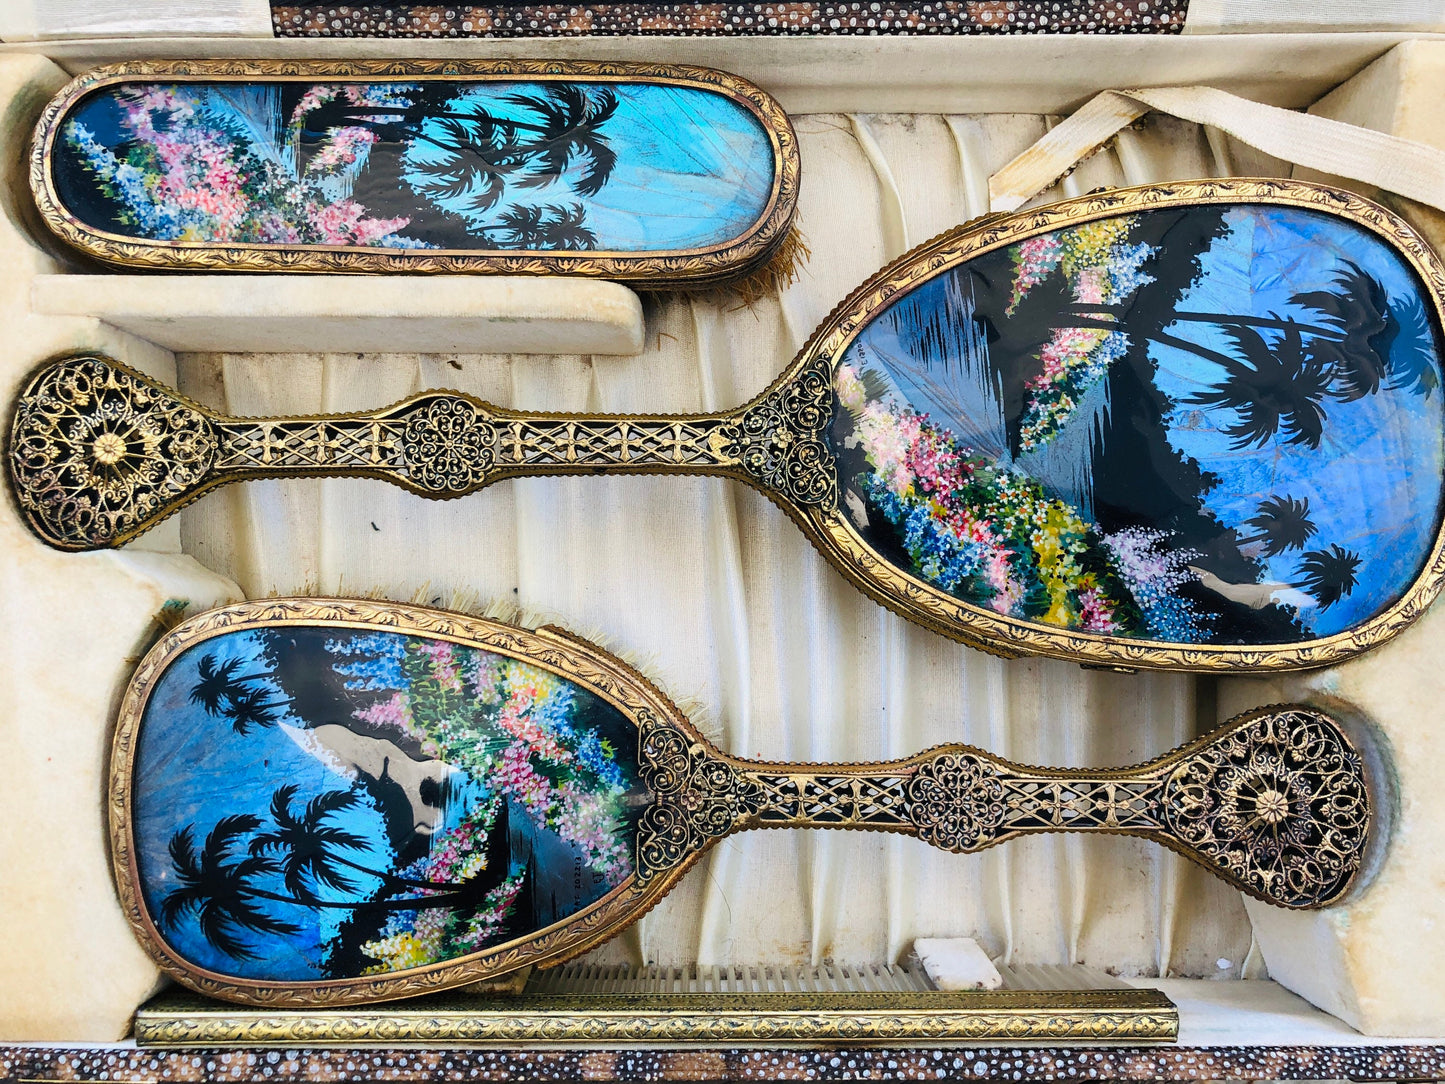 Antique English Blue Morpho Butterfly Wing Gold Filigree Vanity Set in Box: Mirror, Brush x 2 & Comb